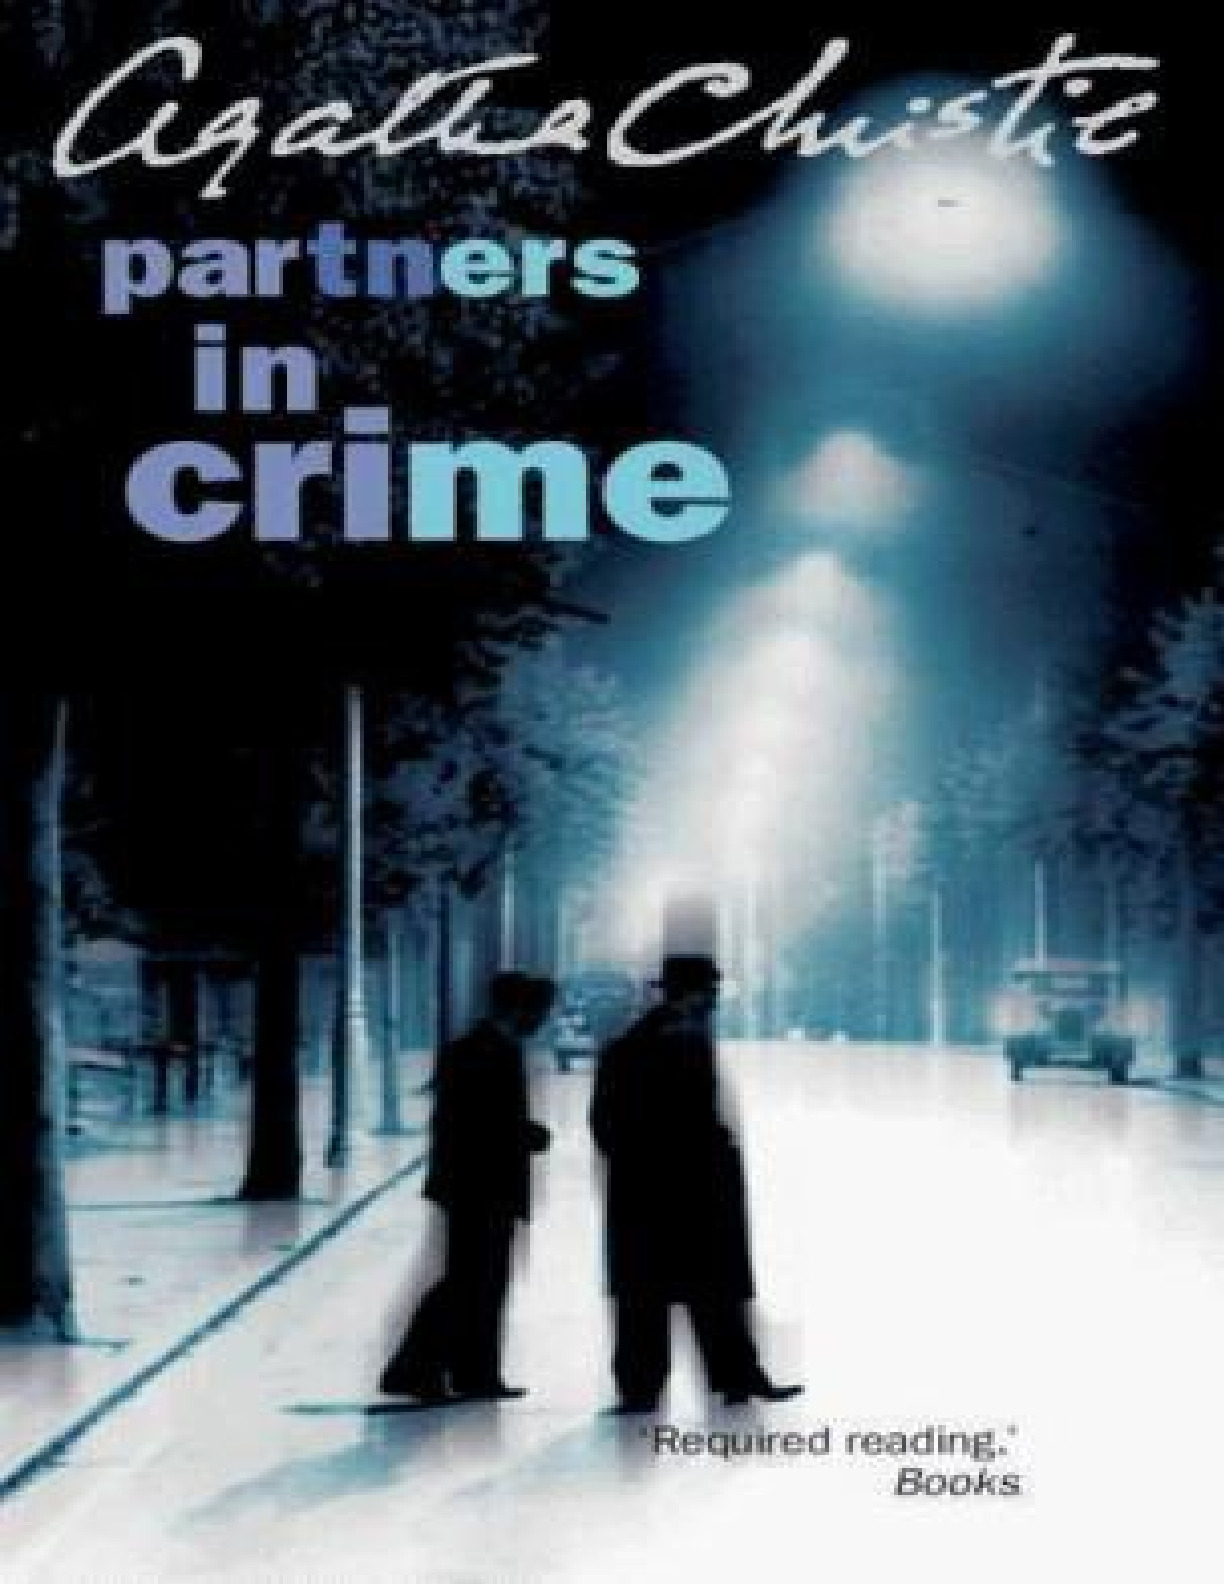 Partners in crime – Agatha Christie